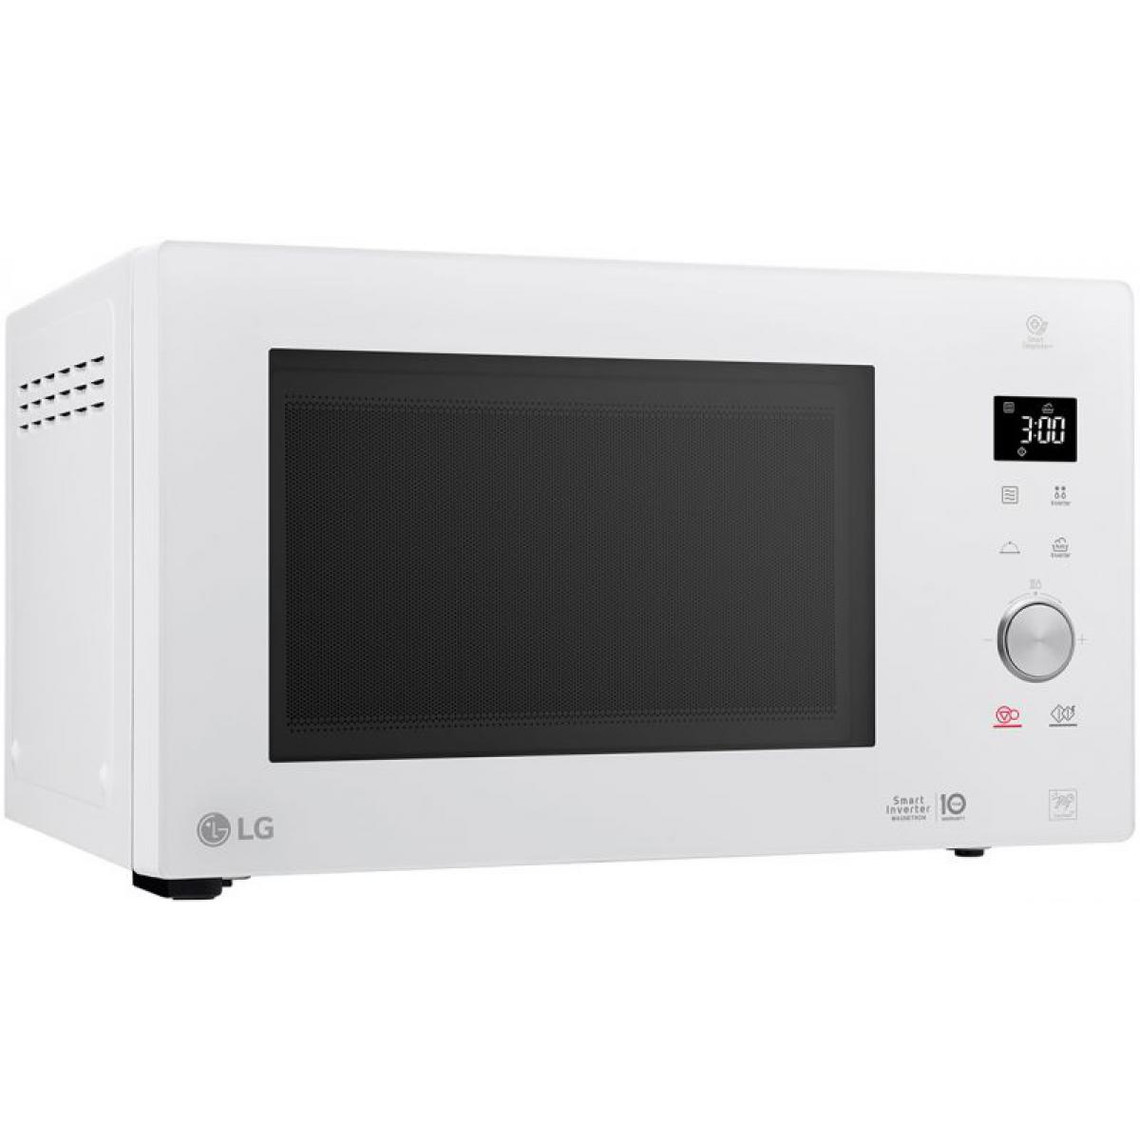 LG Micro ondes MS3265DDH